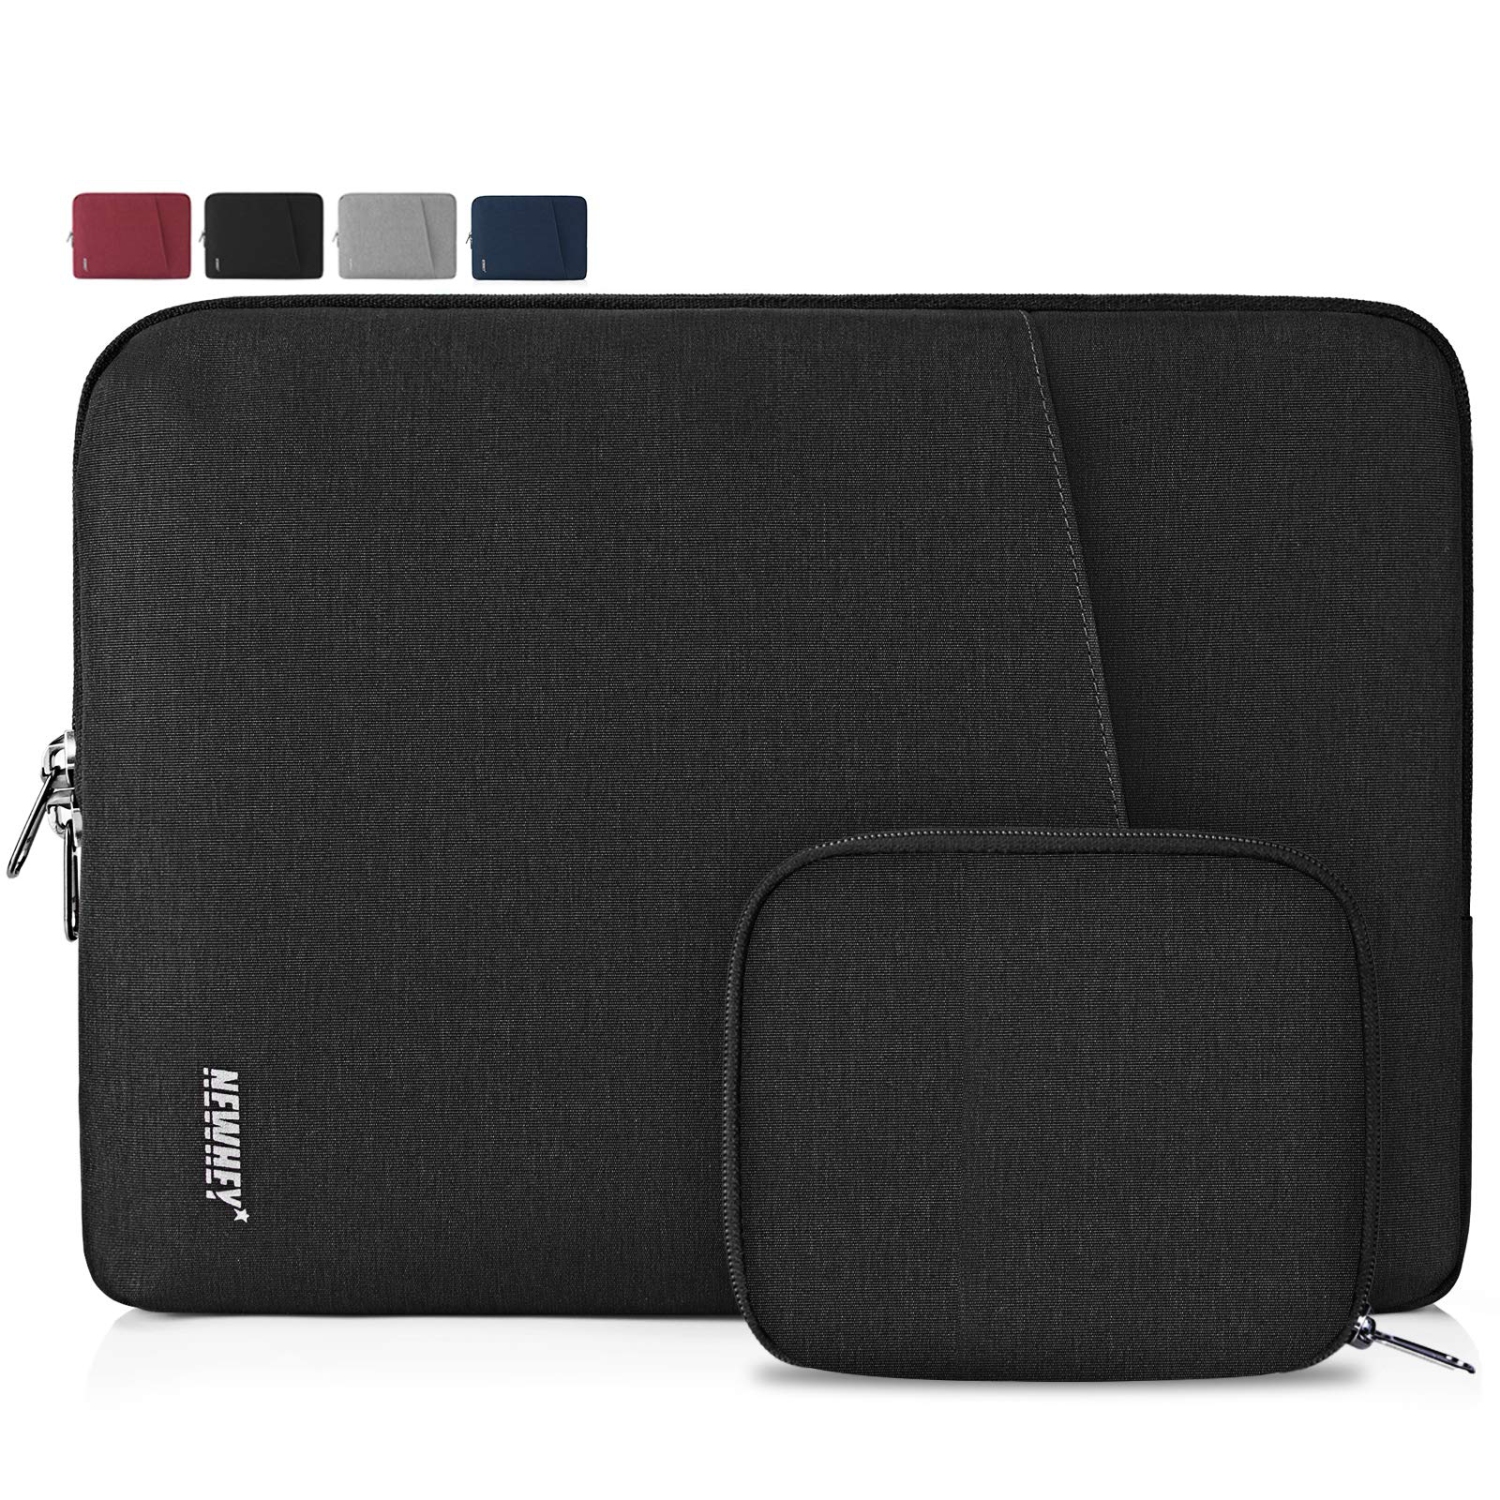 Laptop Case 13-14 Inch Waterproof Laptop Sleeve Bag Business Computer Case Compatible with 13 Inch MacBook Air/Pro Notebook